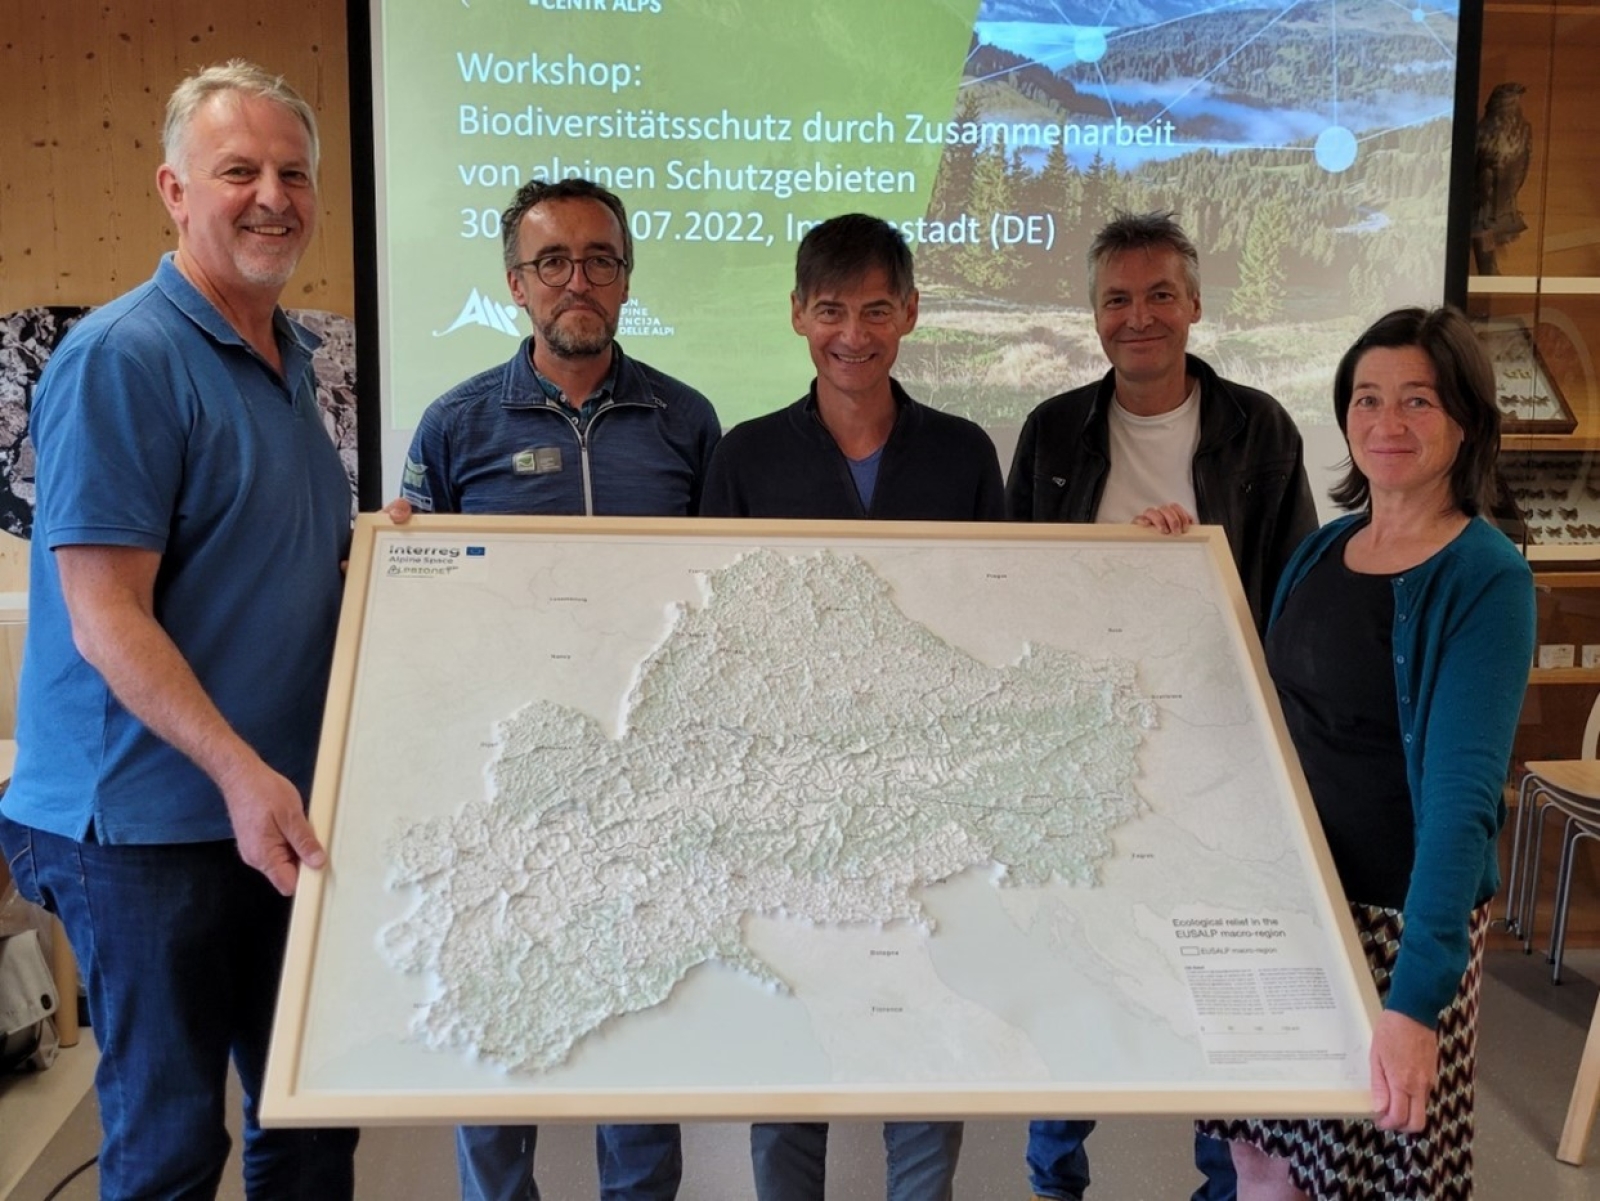 Cooperation between protected areas in the Alps – new network point in Immenstadt i.Allgäu (DE) and workshop